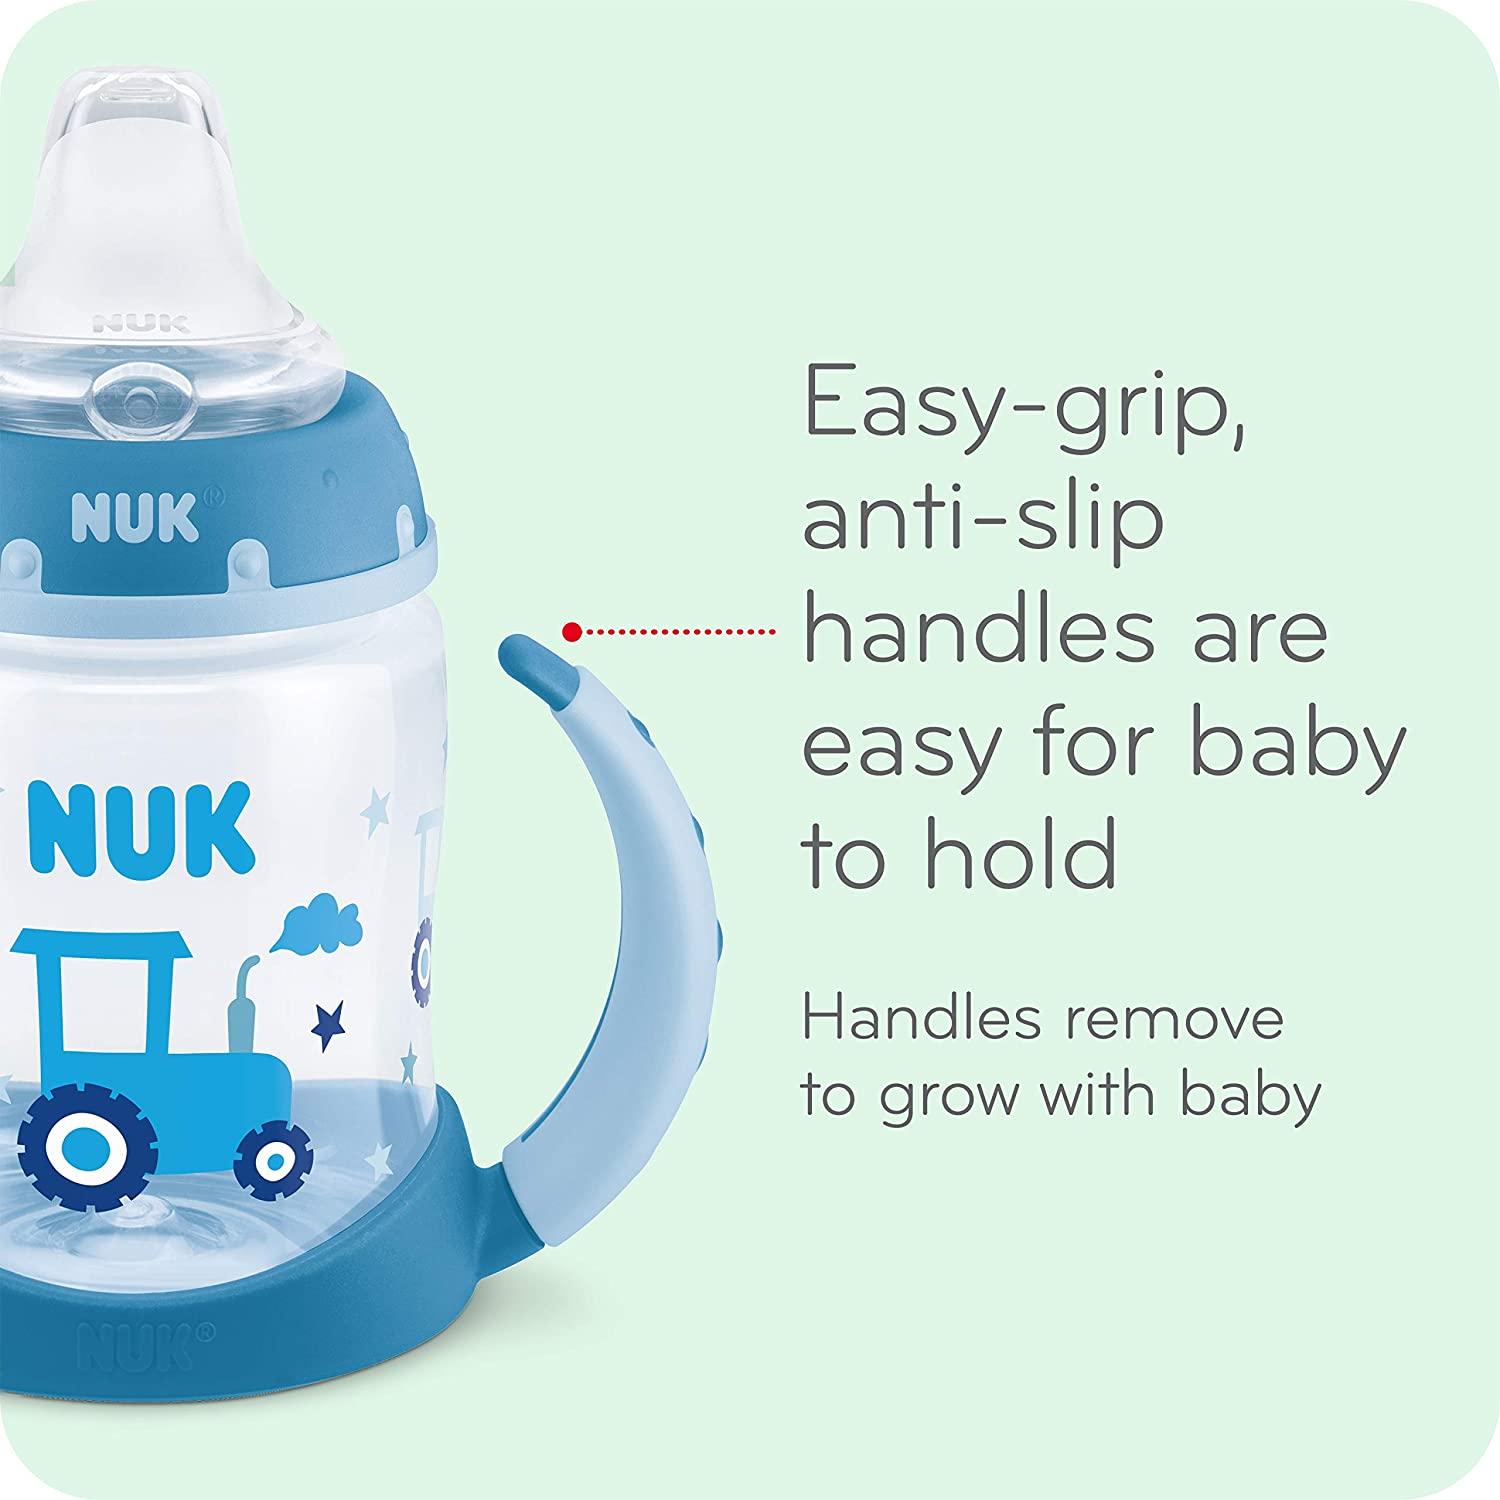 NUK Learner Straw Cup, 10 oz